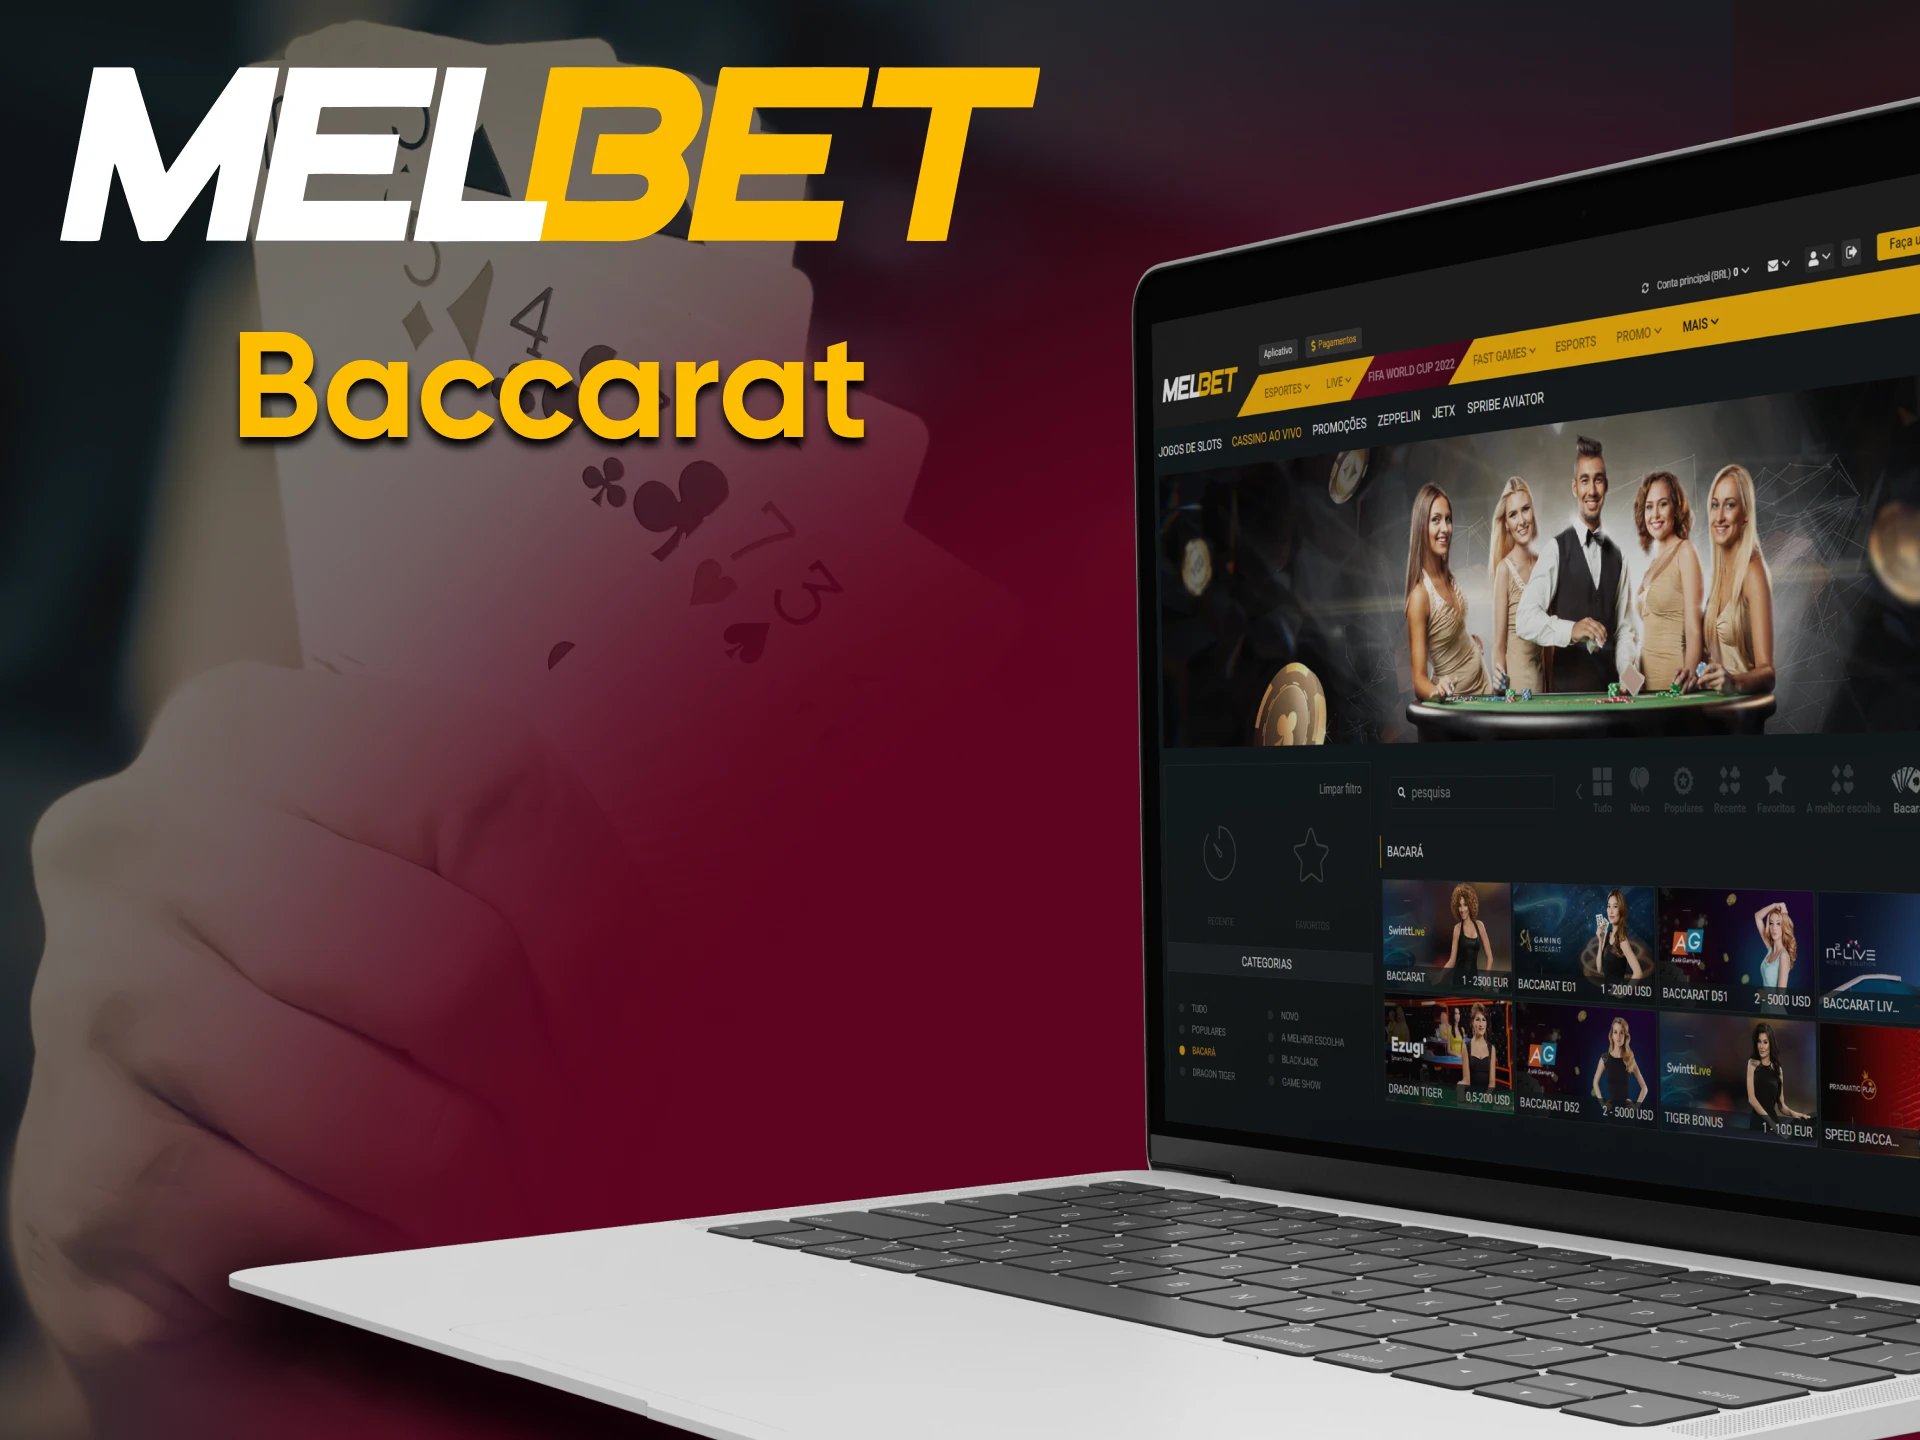 For card game lovers, Melbet has Baccarat.